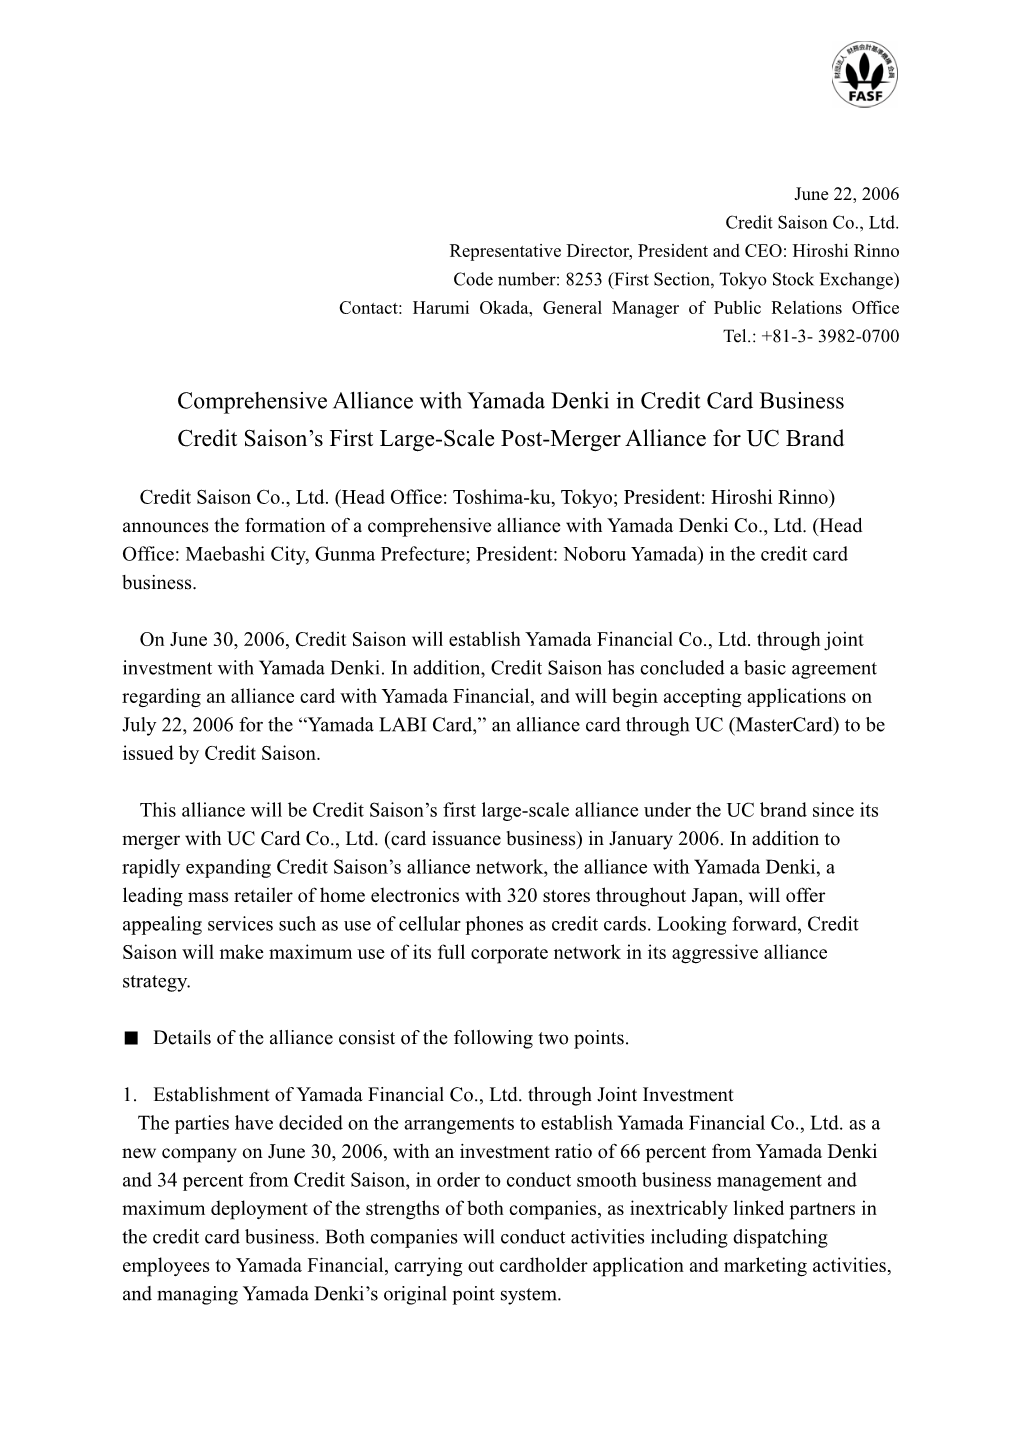 Comprehensive Alliance with Yamada Denki in Credit Card Business Credit Saison's First Large-Scale Post-Merger Alliance for UC